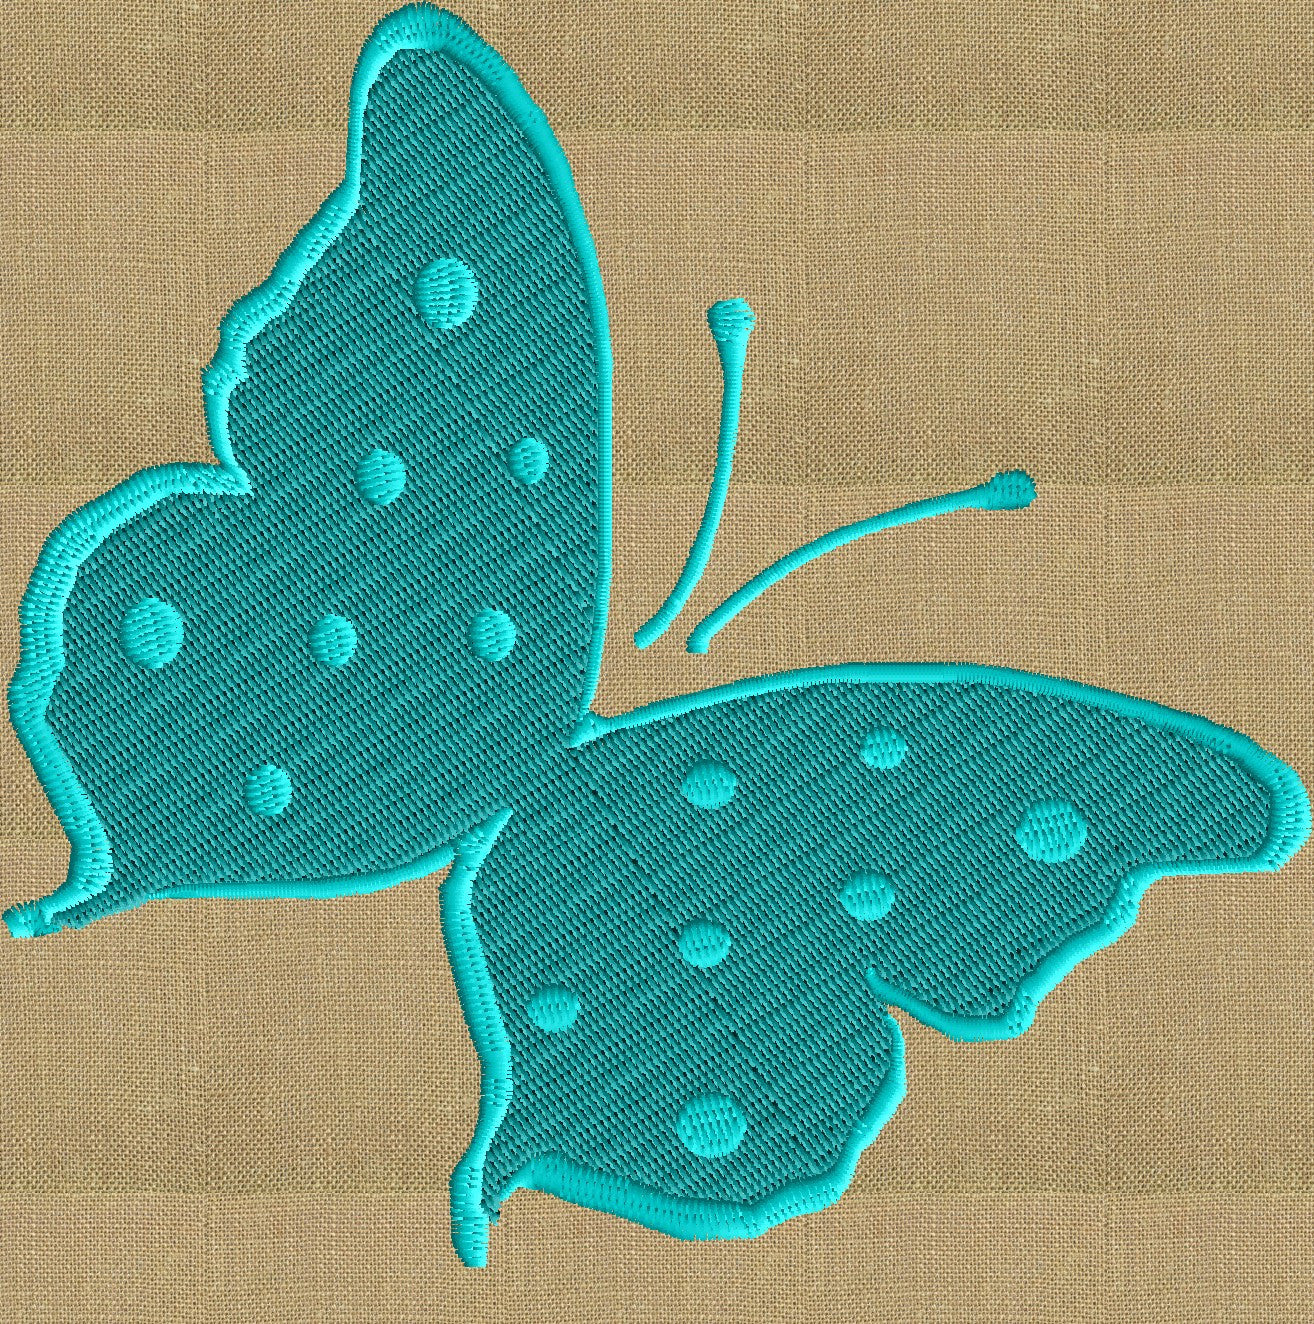 Butterfly - EMBROIDERY DESIGN file - Instant download Exp Jef Vp3 Pes Dst Hus formats - 2 sizes & 2 colors